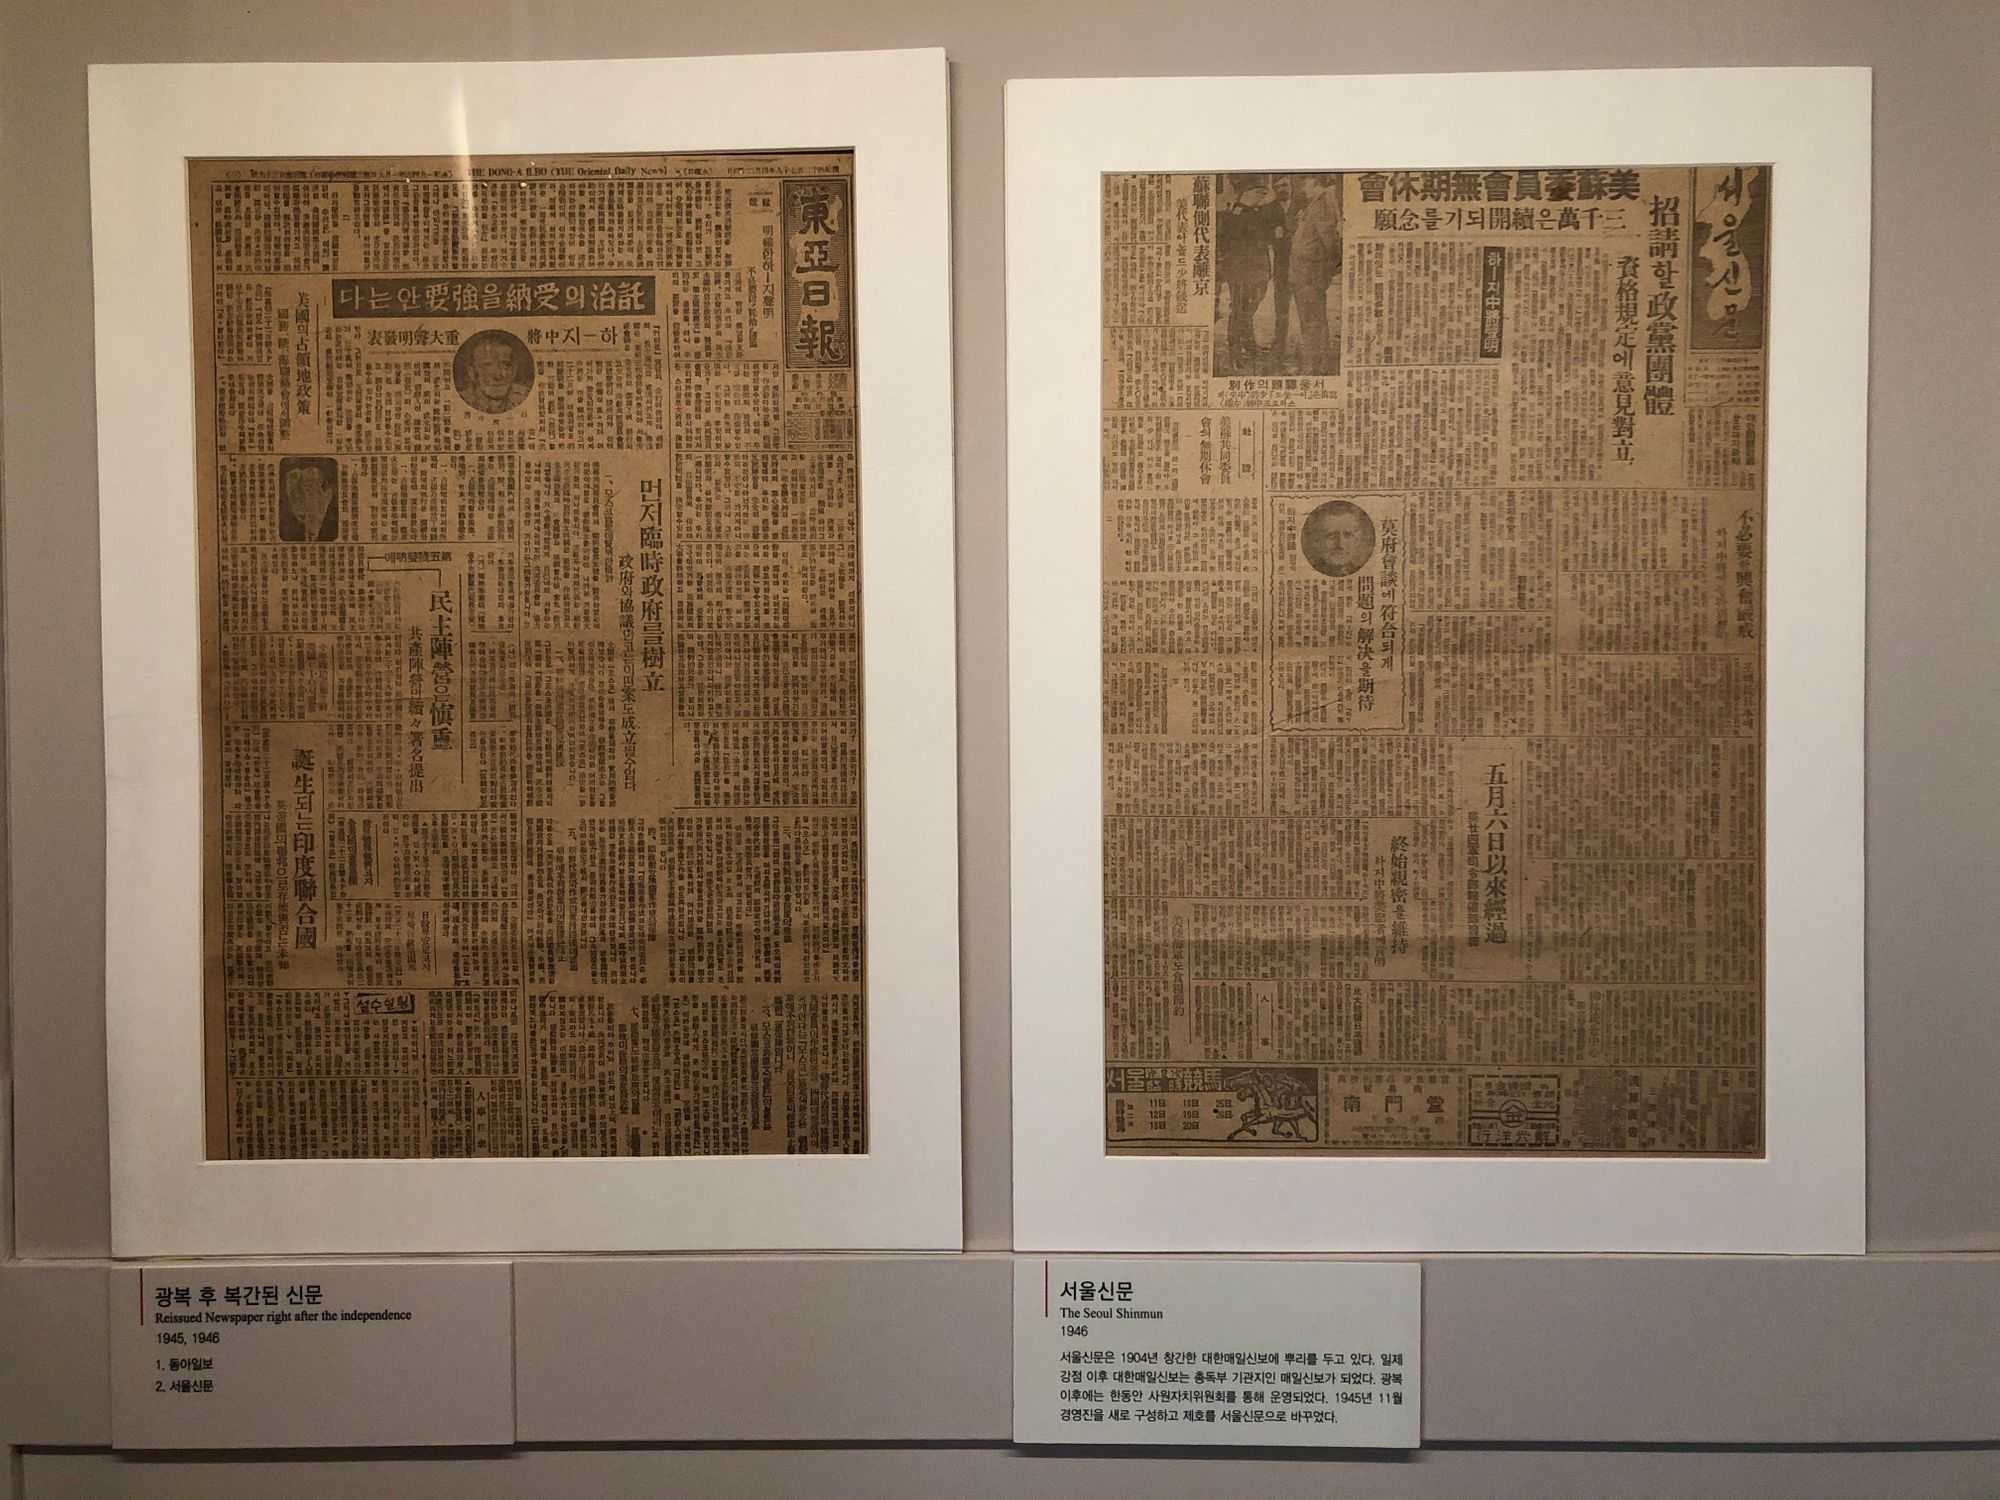 An old Korean newspaper (Image by author)